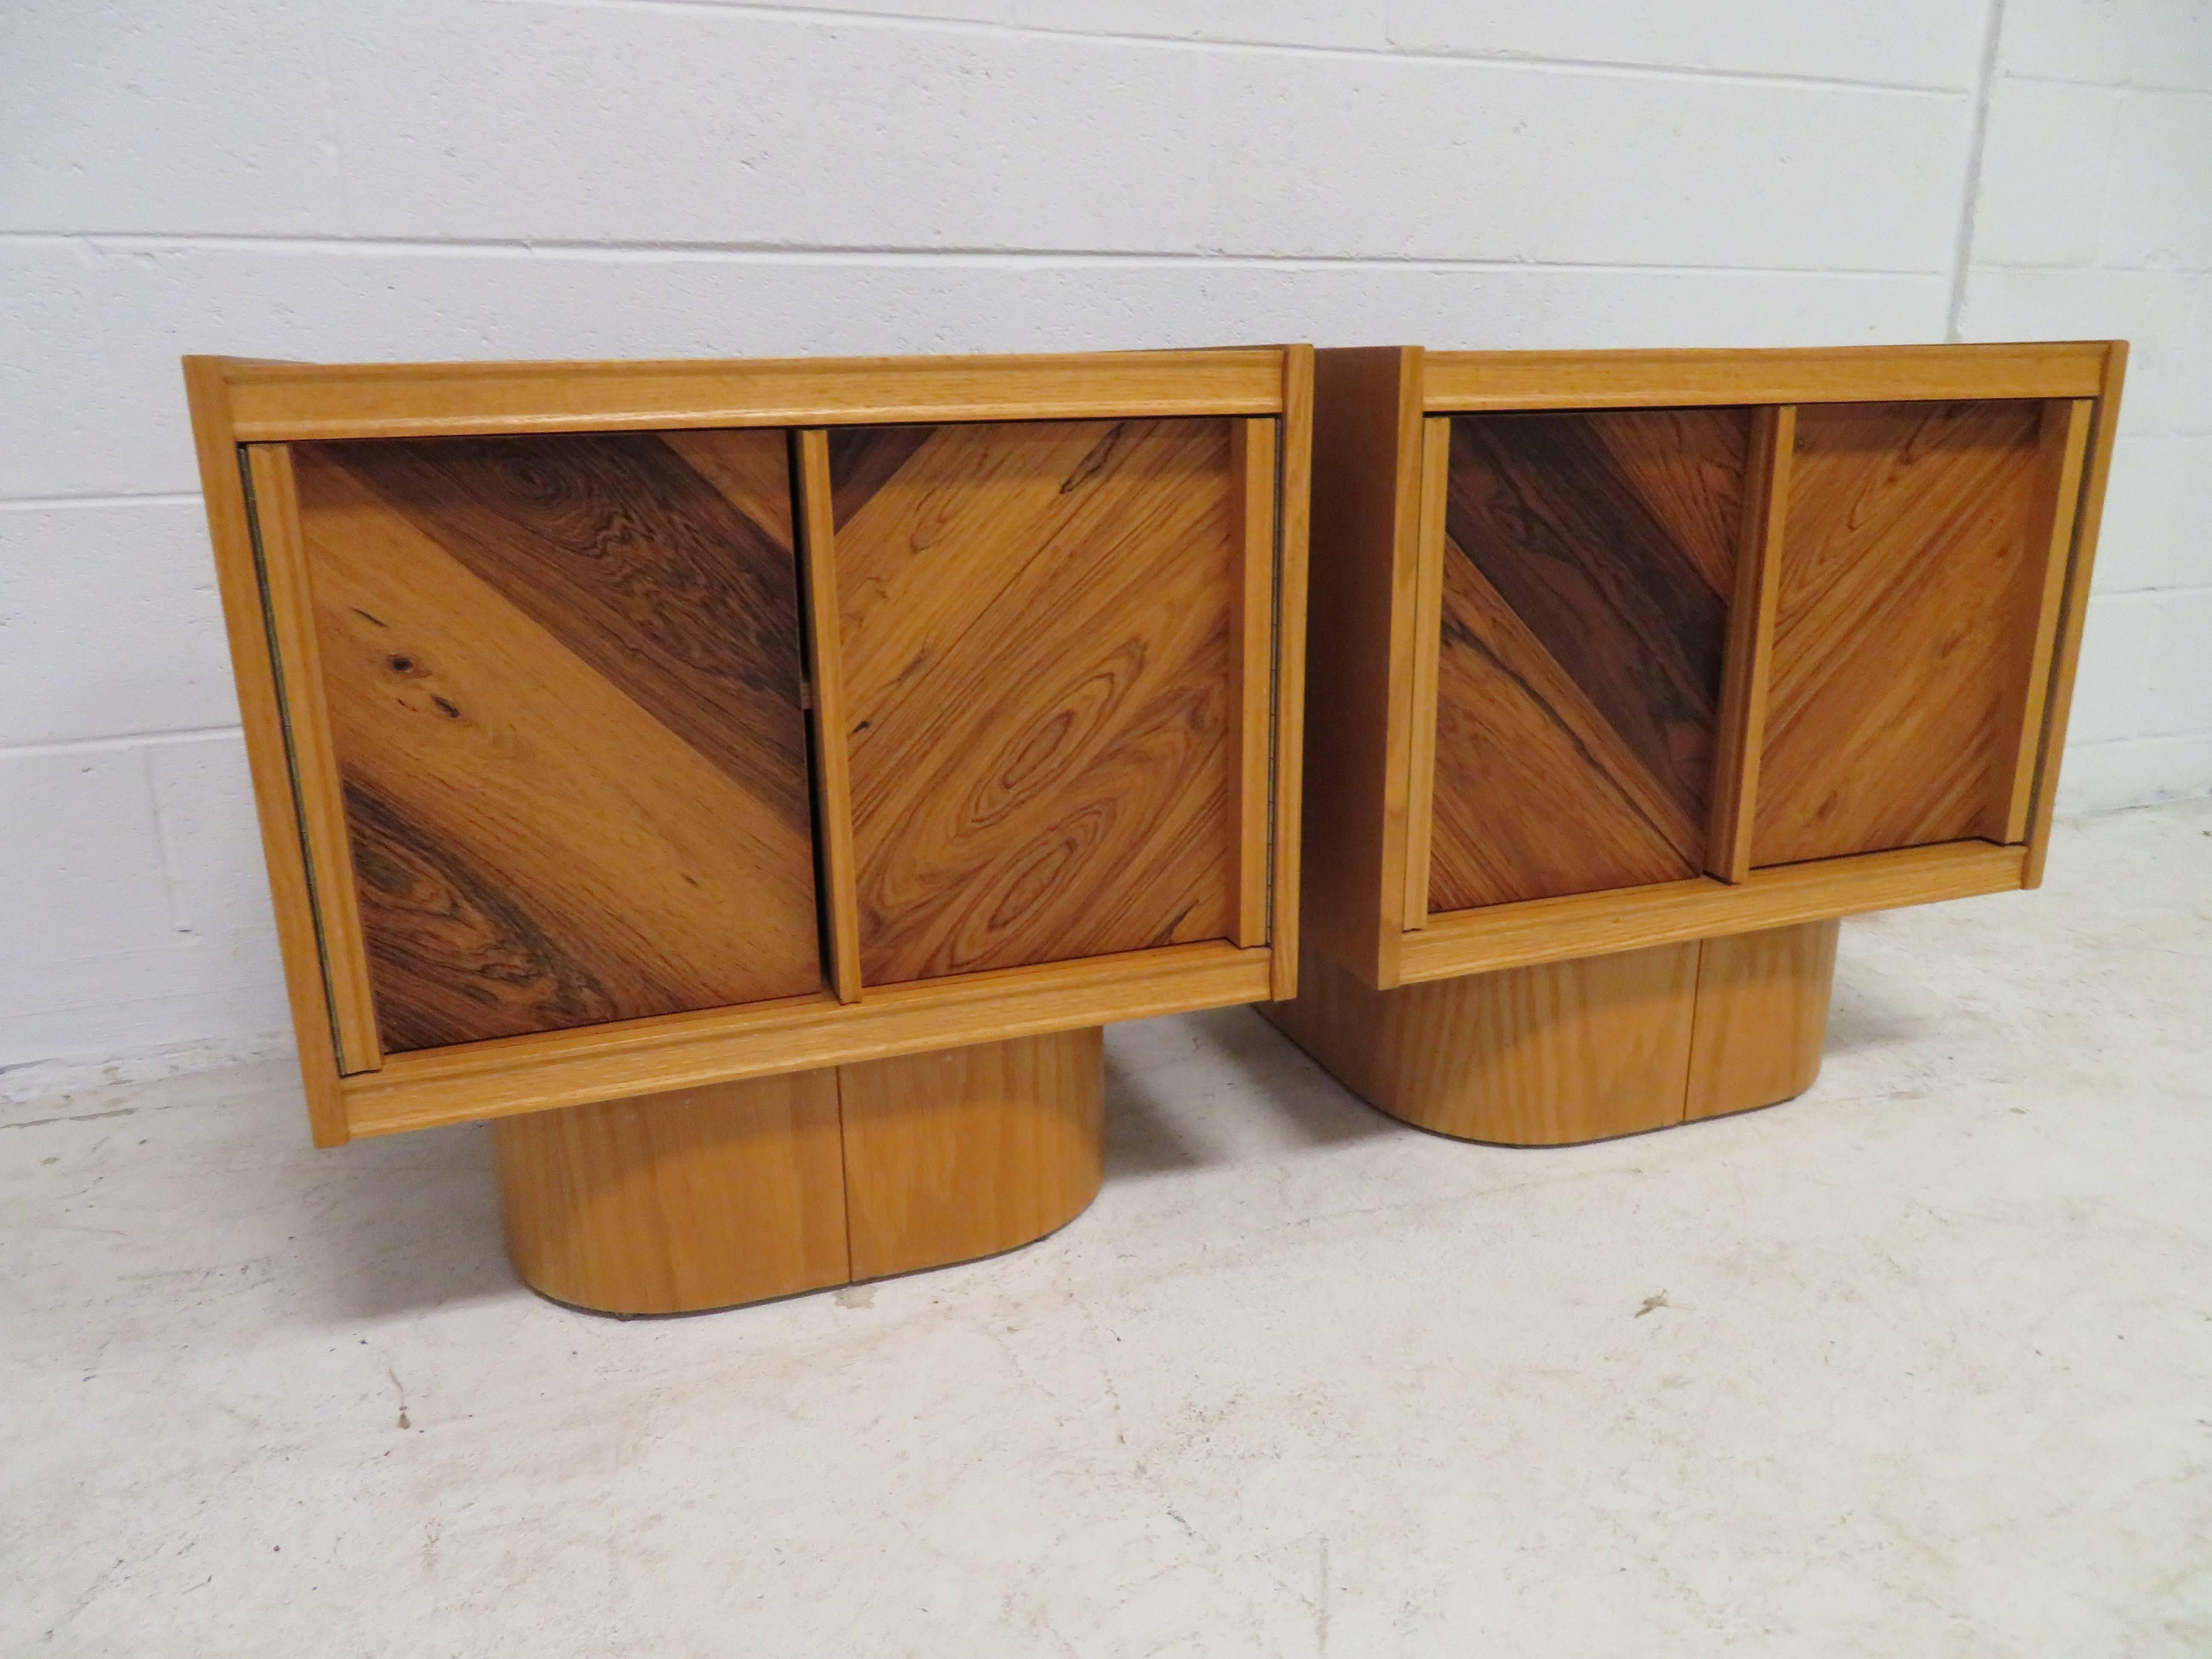 Unusual plinth base Mid-Century Modern nightstands. We love the contrast of the light and dark wood on the door fronts which open to reveal a single shelf in each. We do have the original queen-size headboard available in another of our 1stdibs